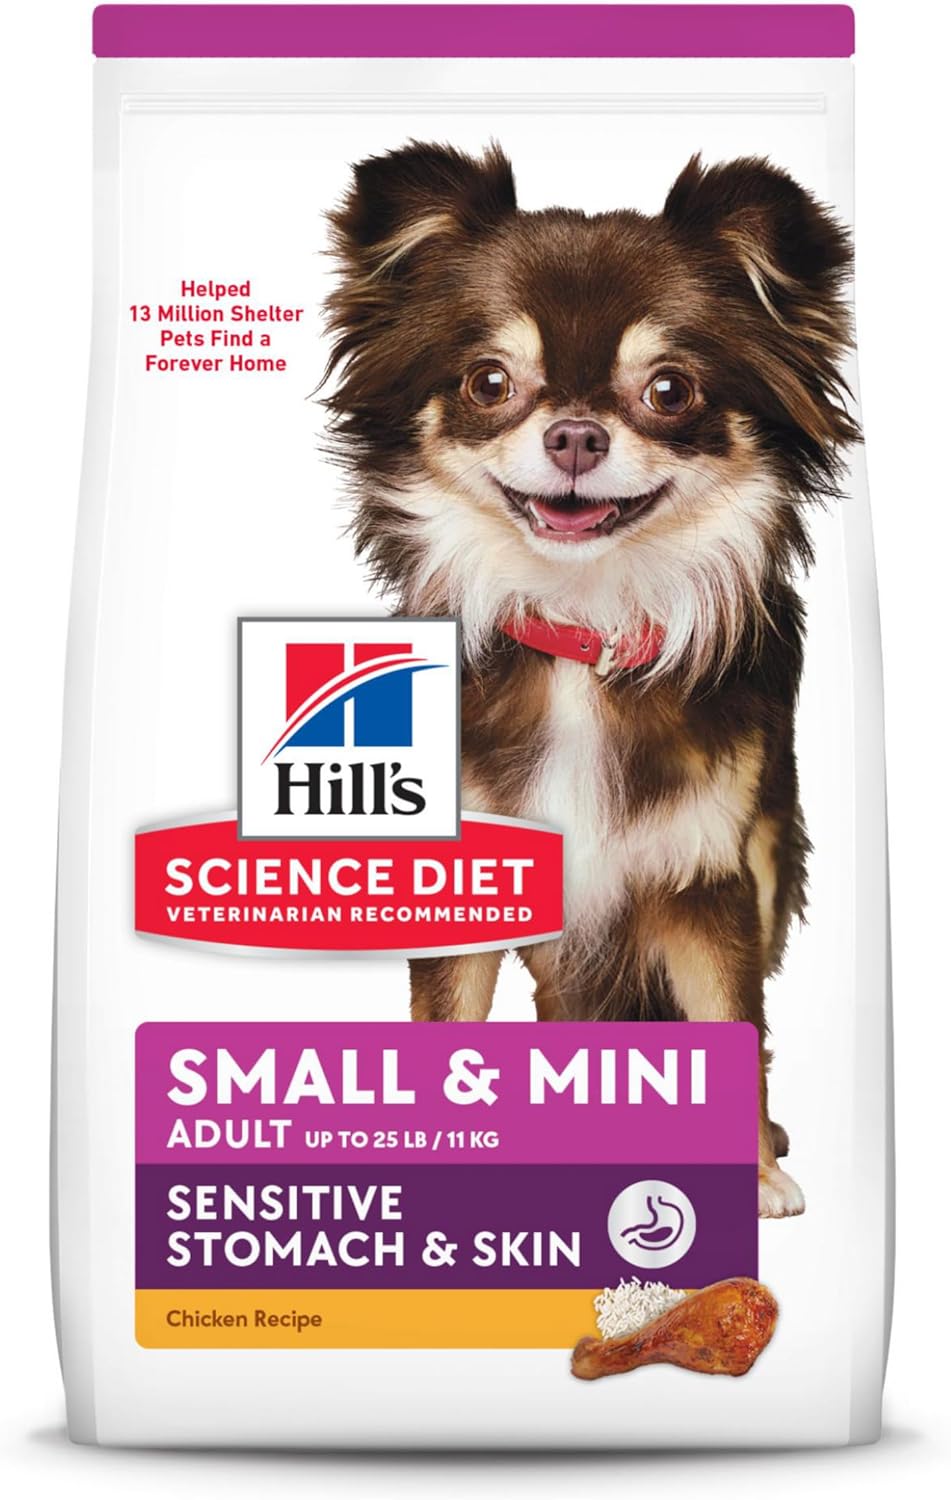 Hill's Science Diet Sensitive Stomach & Skin, Adult 1-6, Small & Mini Breeds Stomach & Skin Sensitivity Supoort, Dry Dog Food, Chicken Recipe, 4 lb Bag